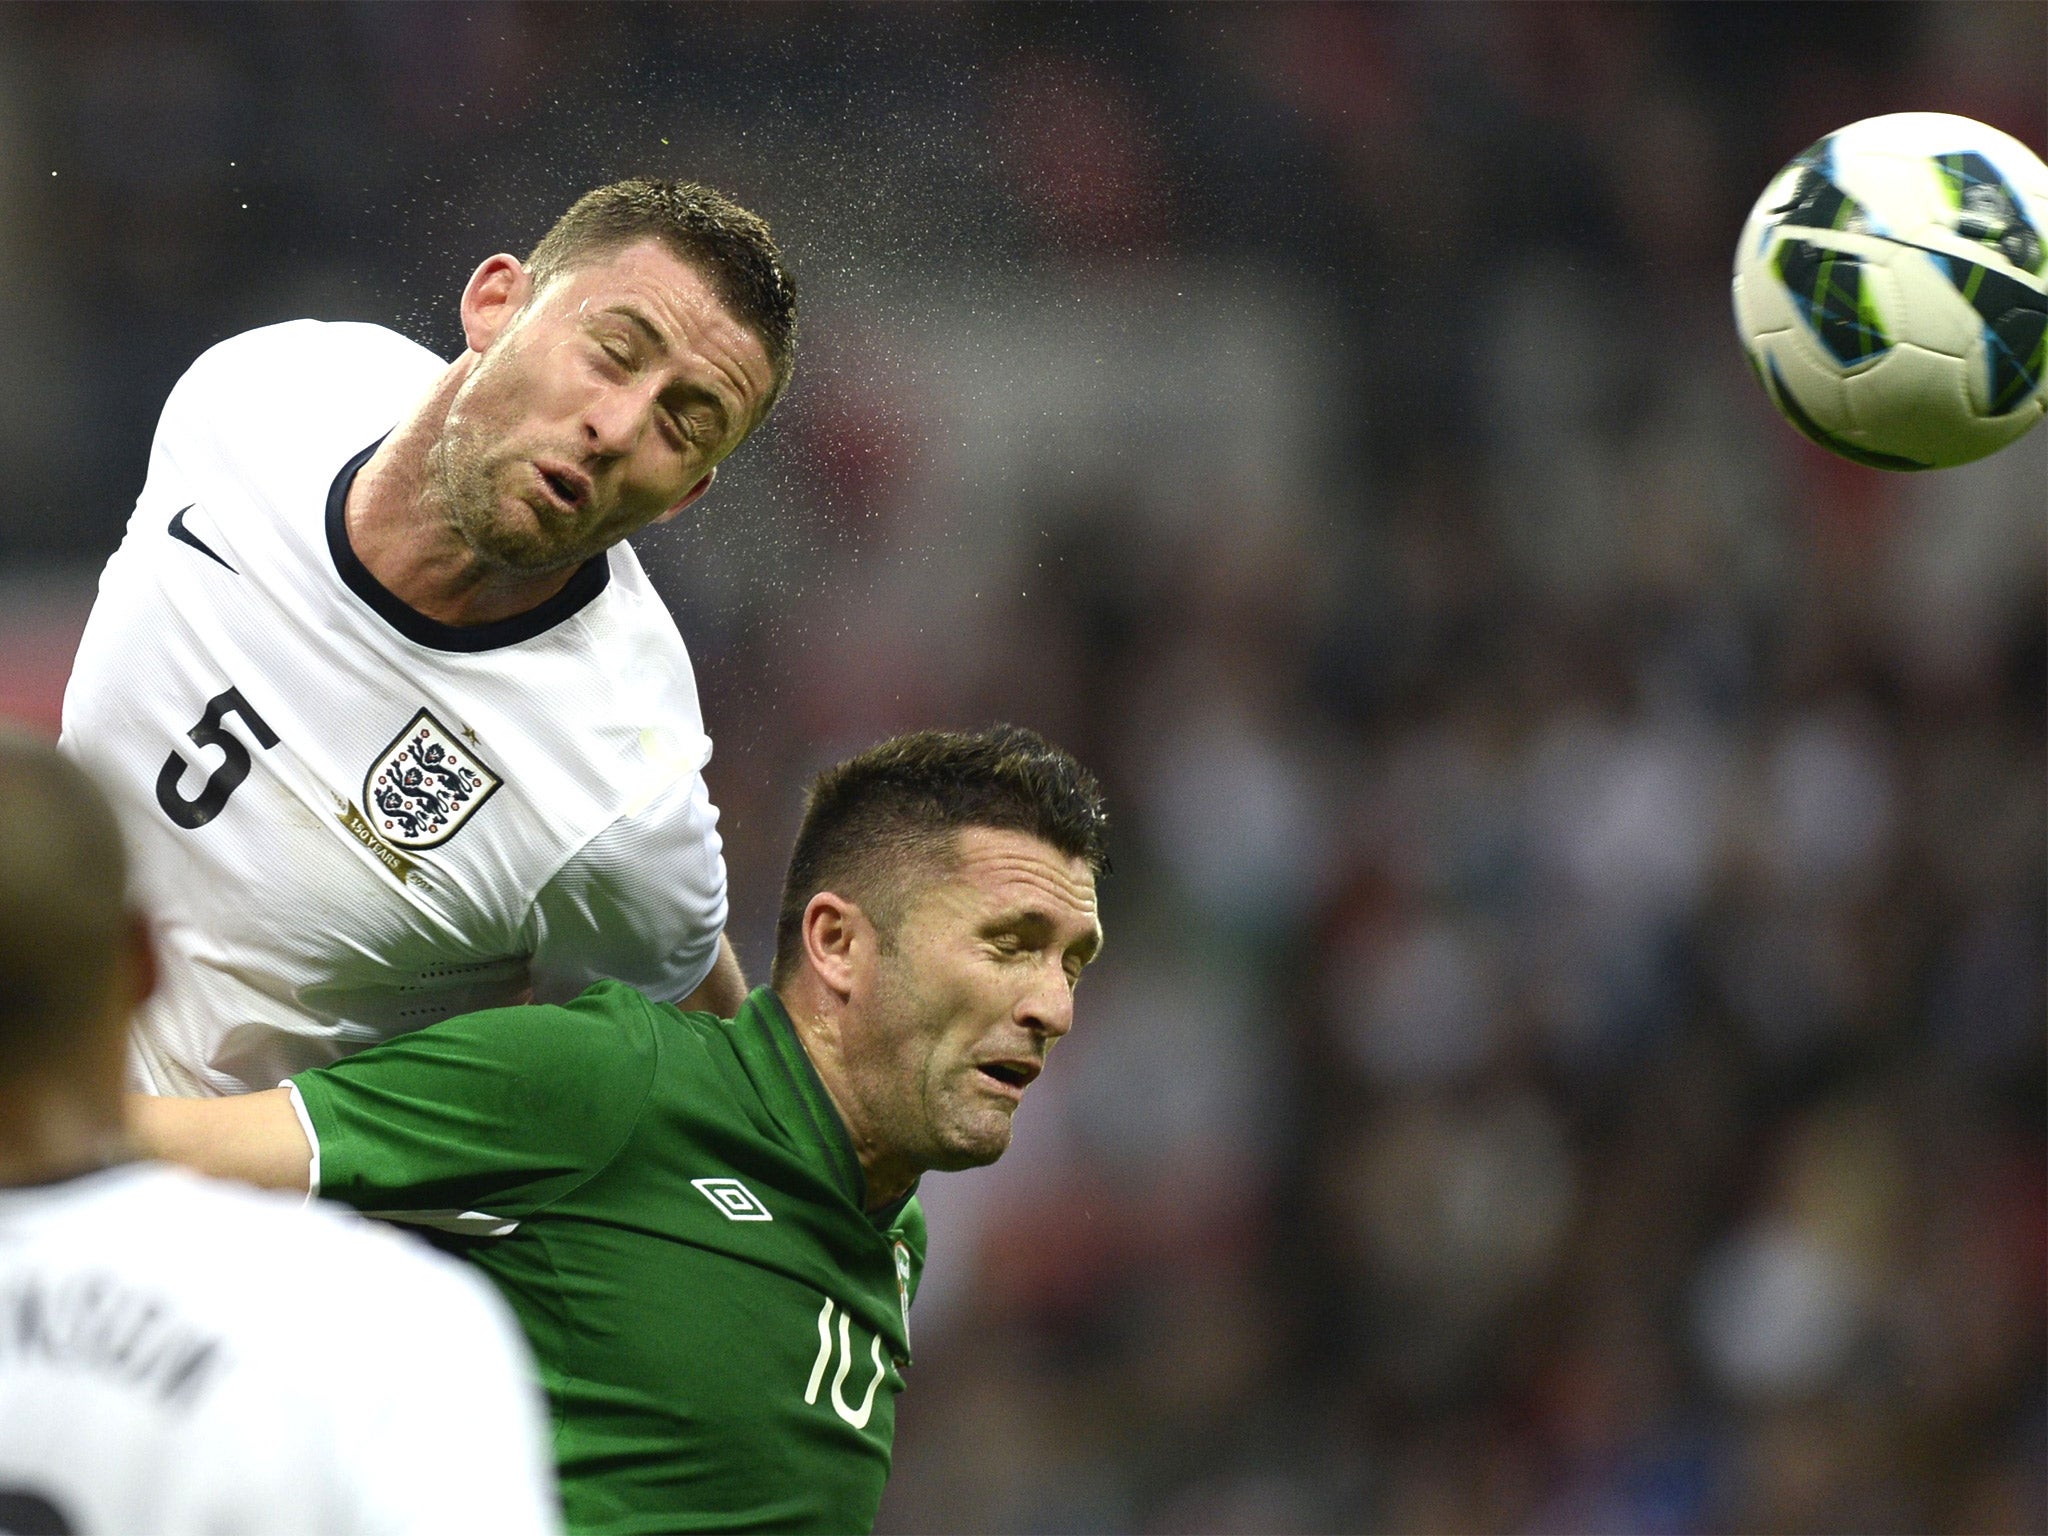 Gary Cahill: Put in some of those sliding tackles which energise the crowd and was usually tidy enough on the ball. 5